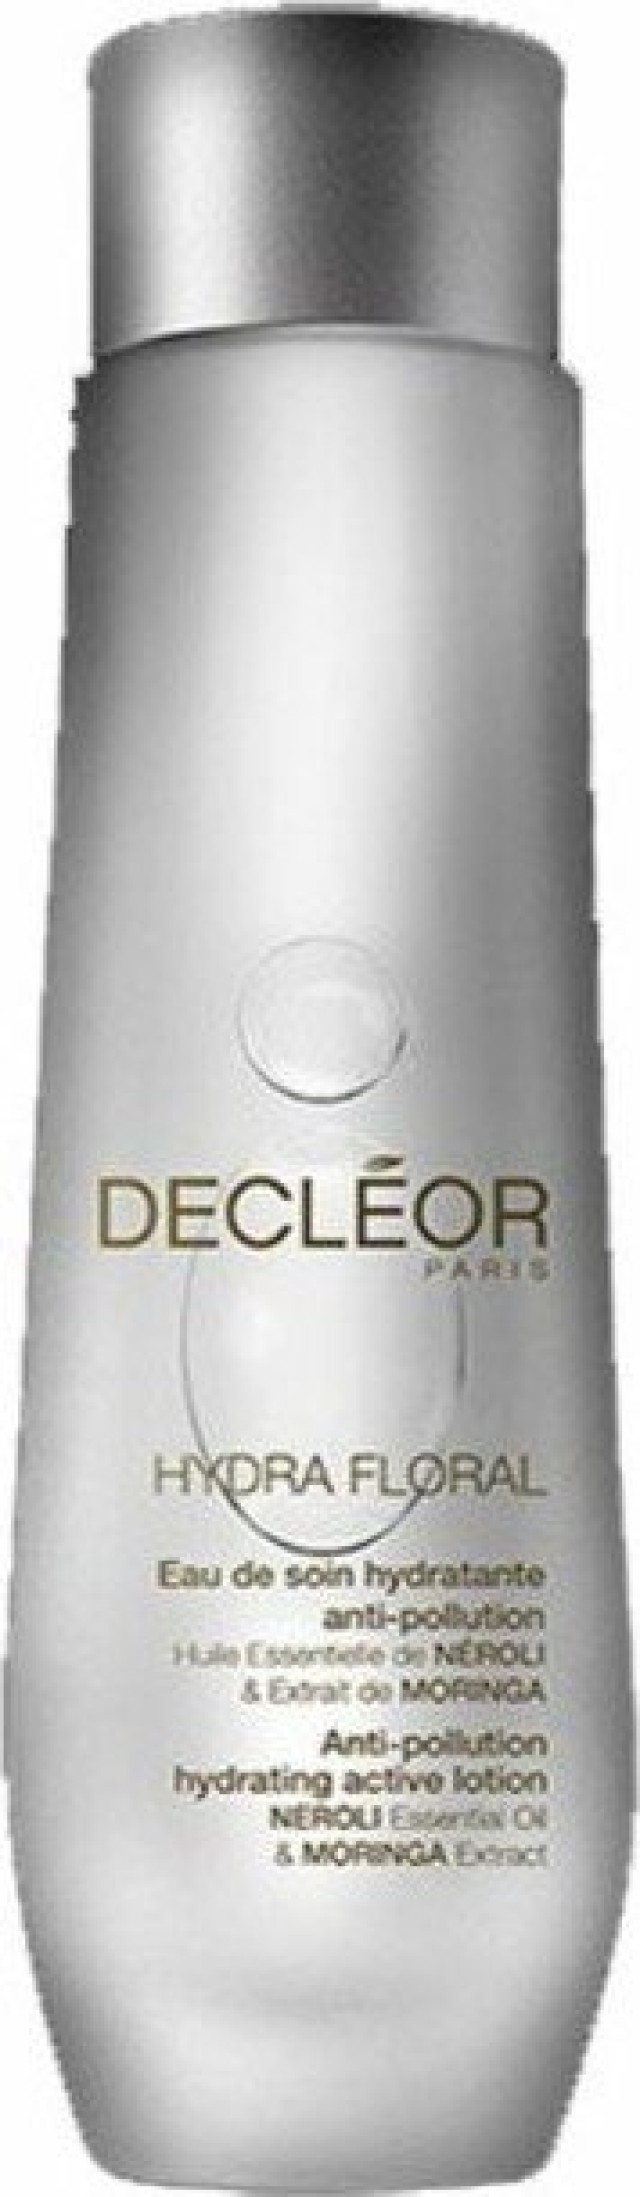 DECLEOR  Hydra Floral Anti-pollution Hydrating Active Lotion 100ml.